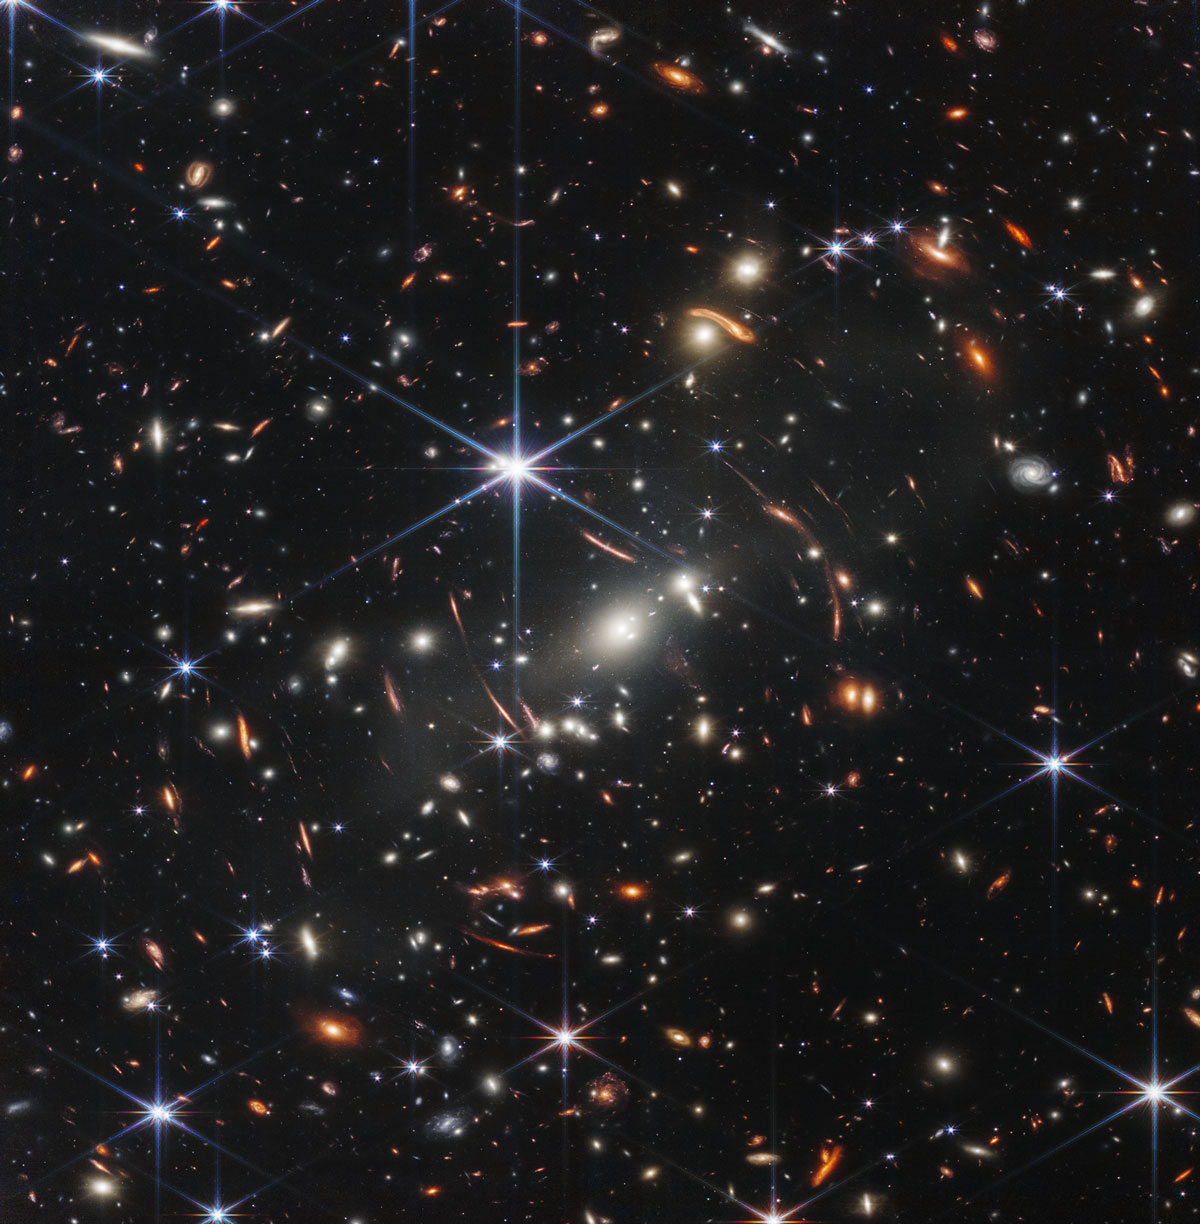 Webb's view of SMACS 0723